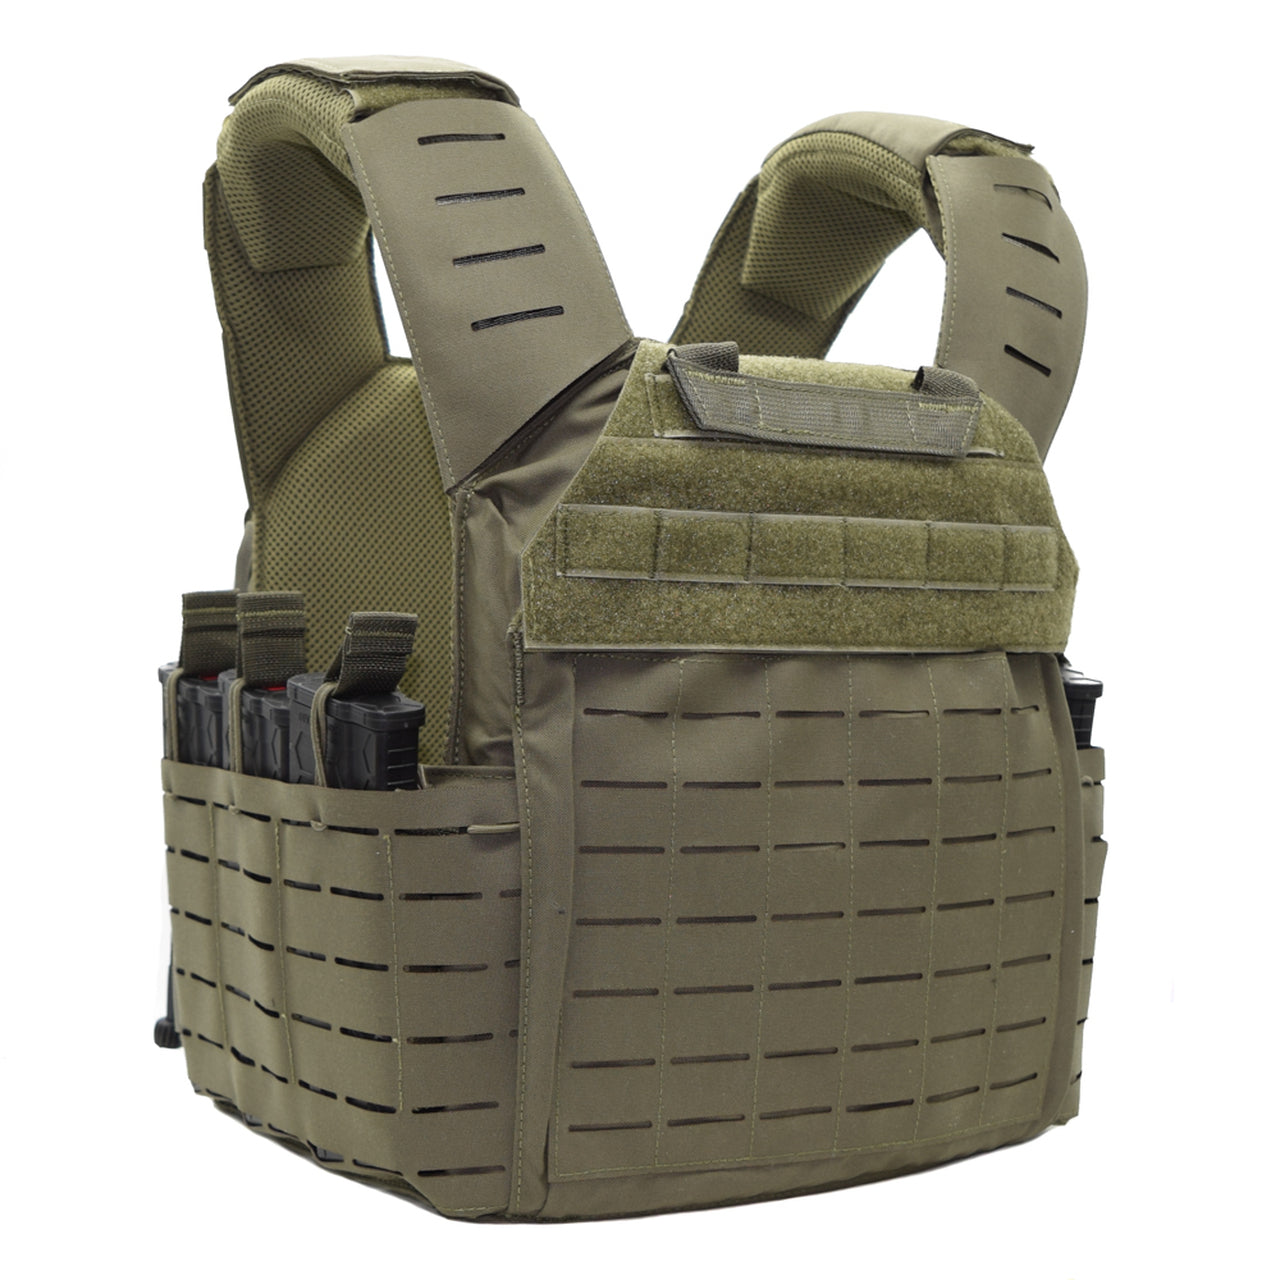 The Shellback Tactical Banshee Elite 3.0 Plate Carrier by Shellback Tactical has multiple compartments.